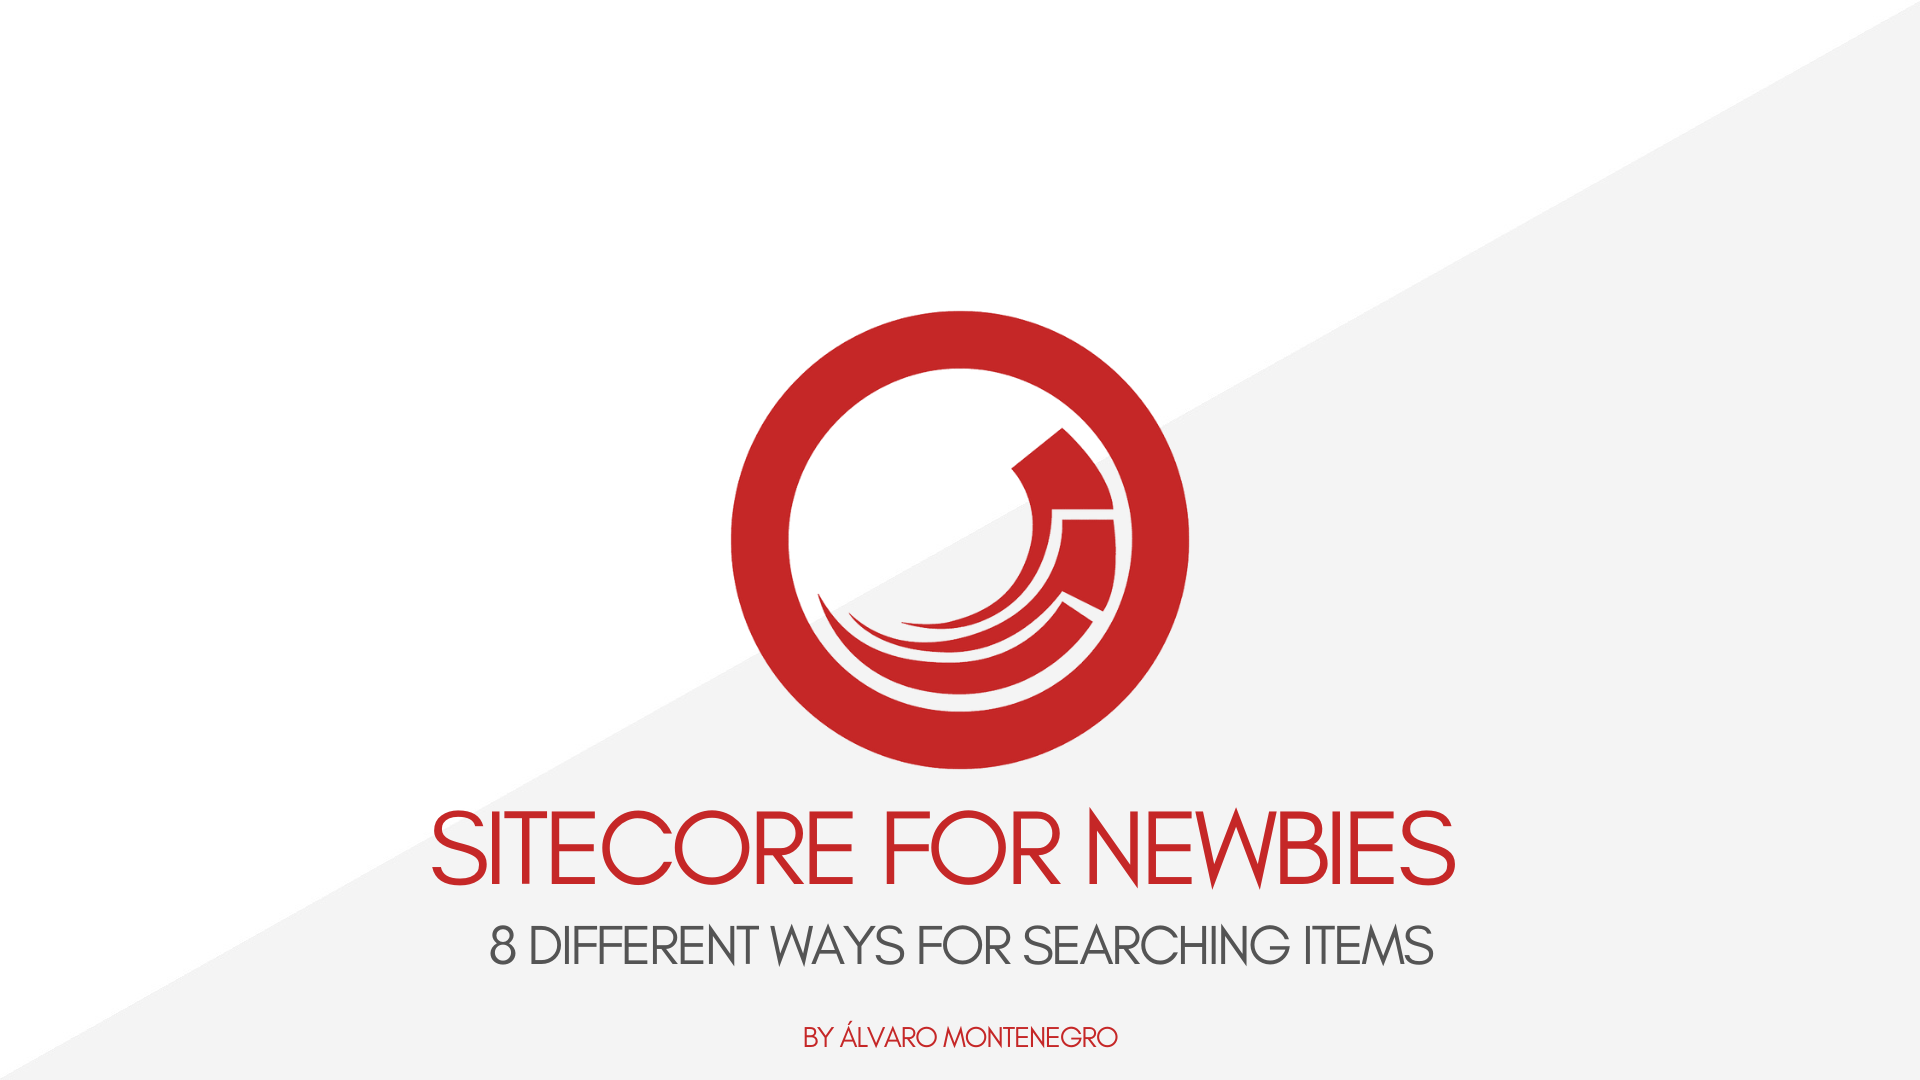 [Sitecore For Newbies] 8 Different Ways For Searching Items